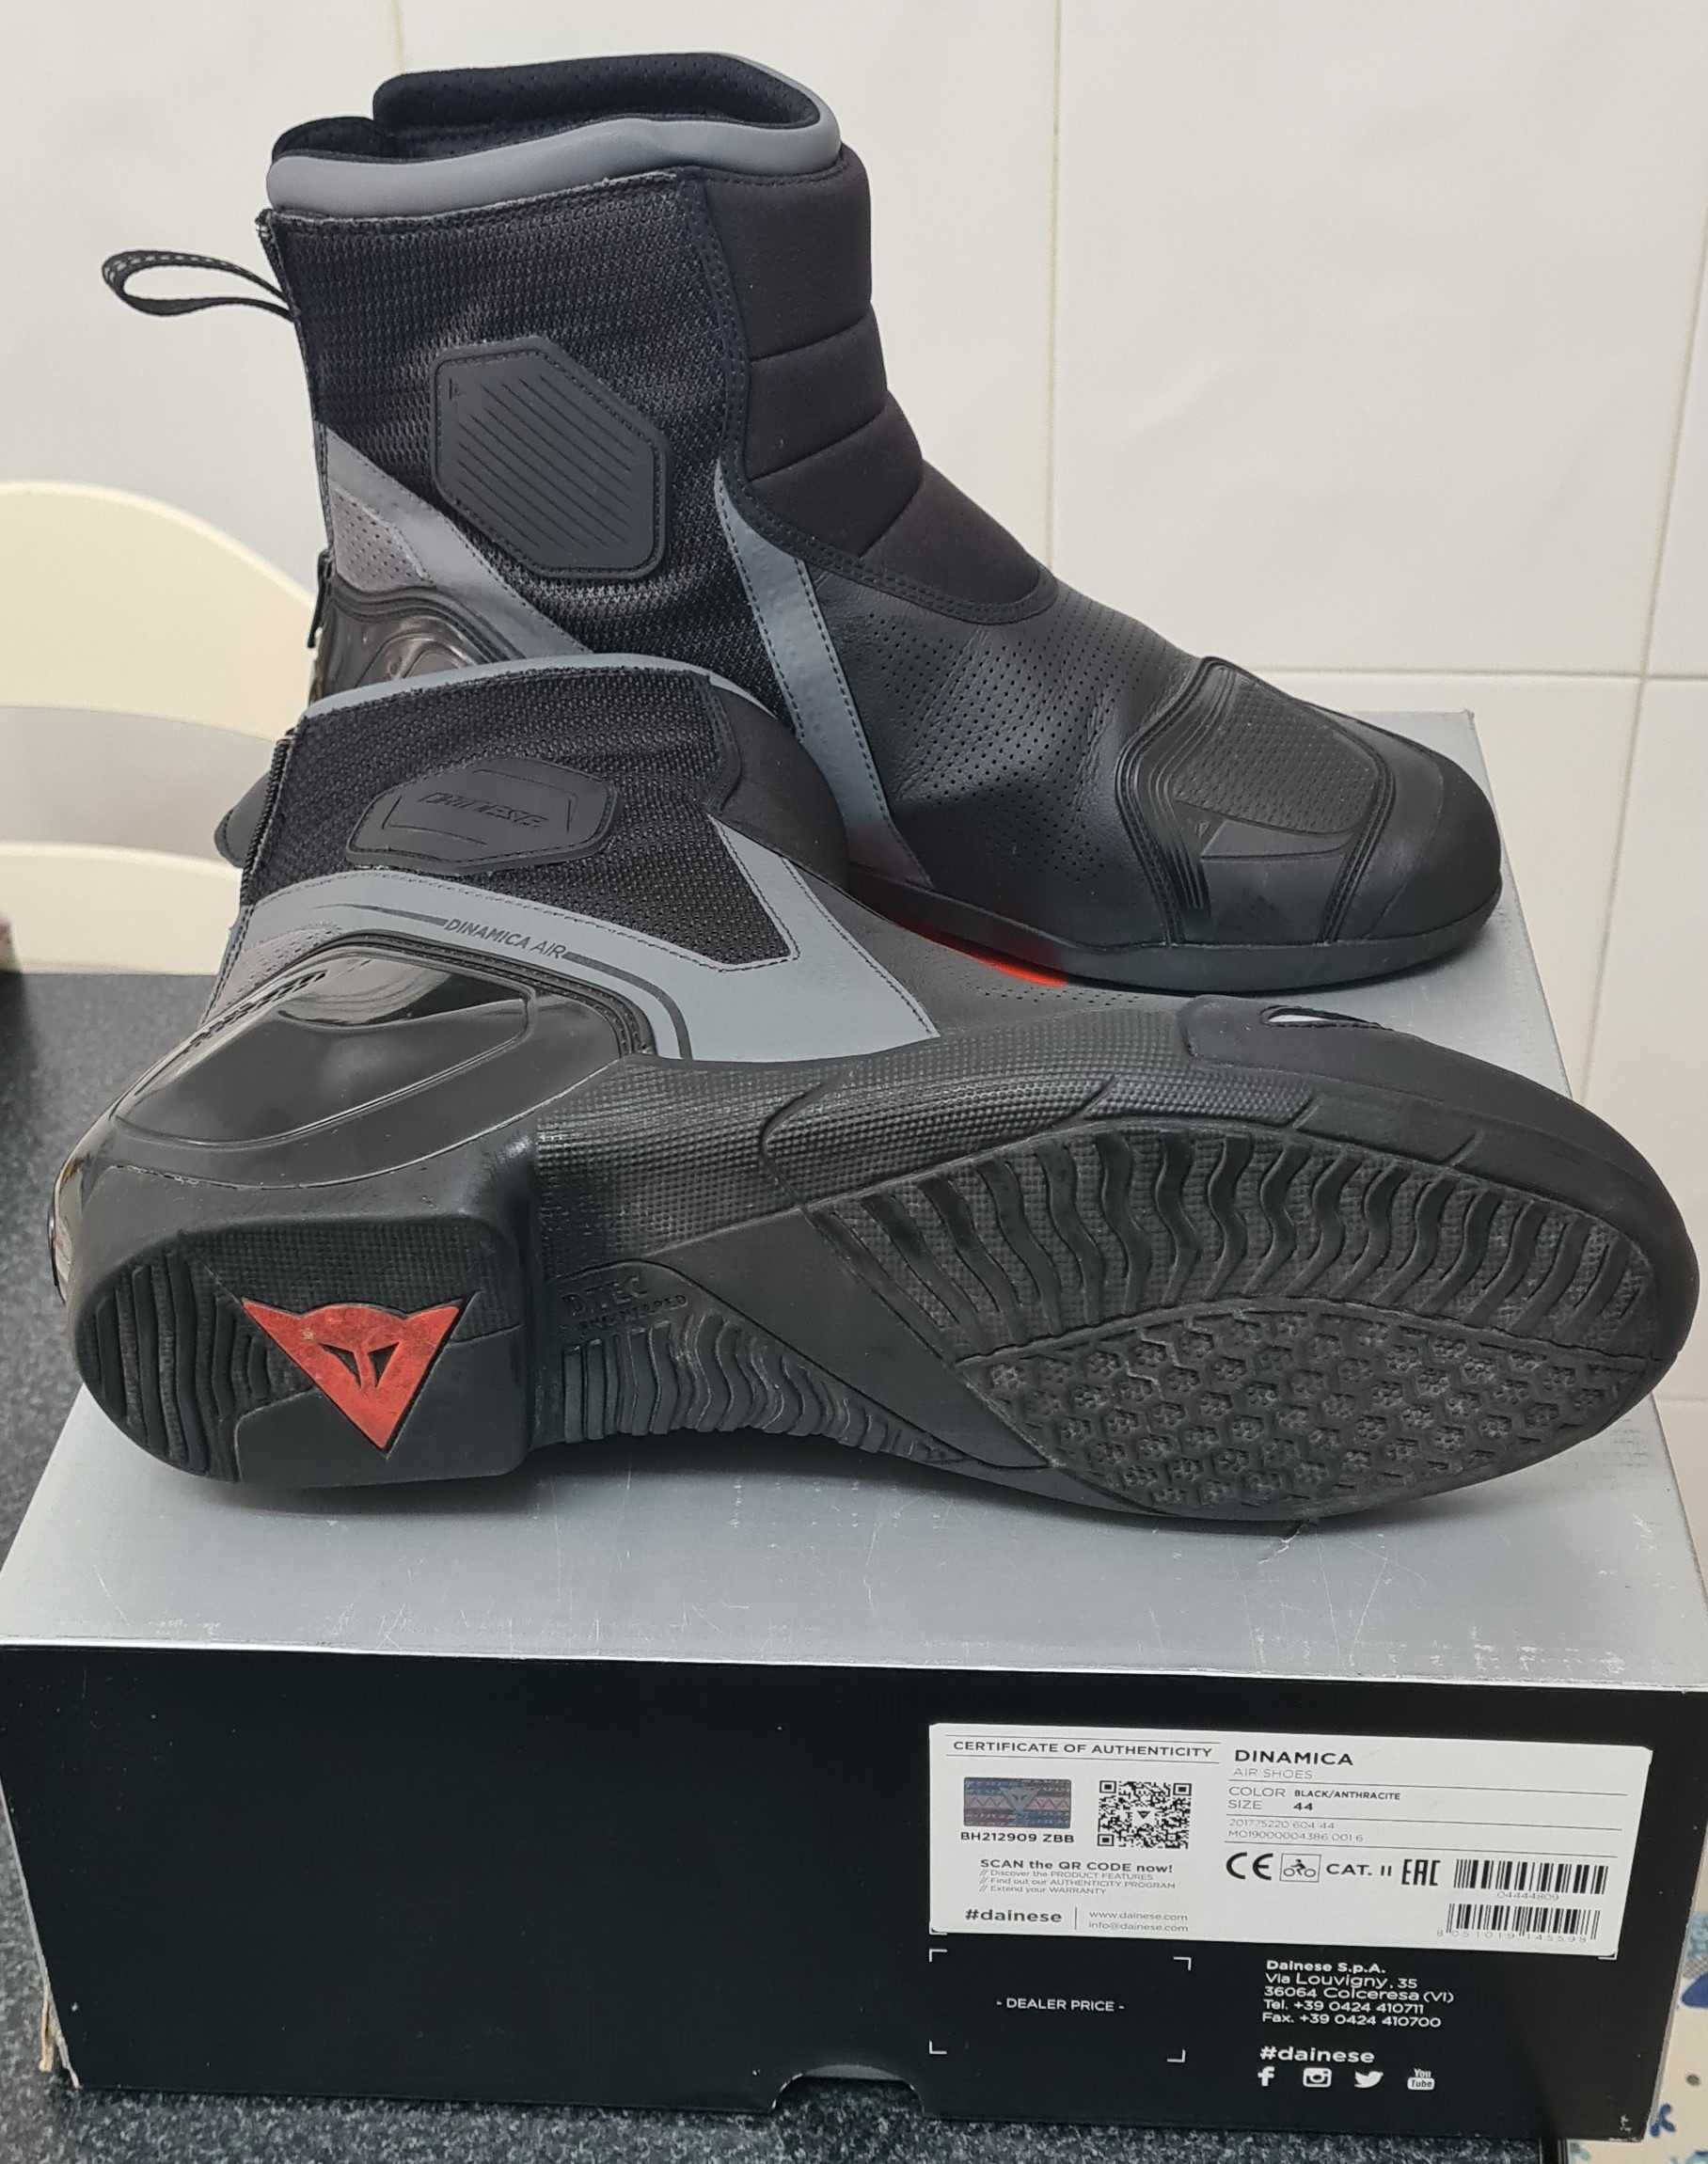 Botas Dainese Dinamica Air Shoes Black/Anthracite